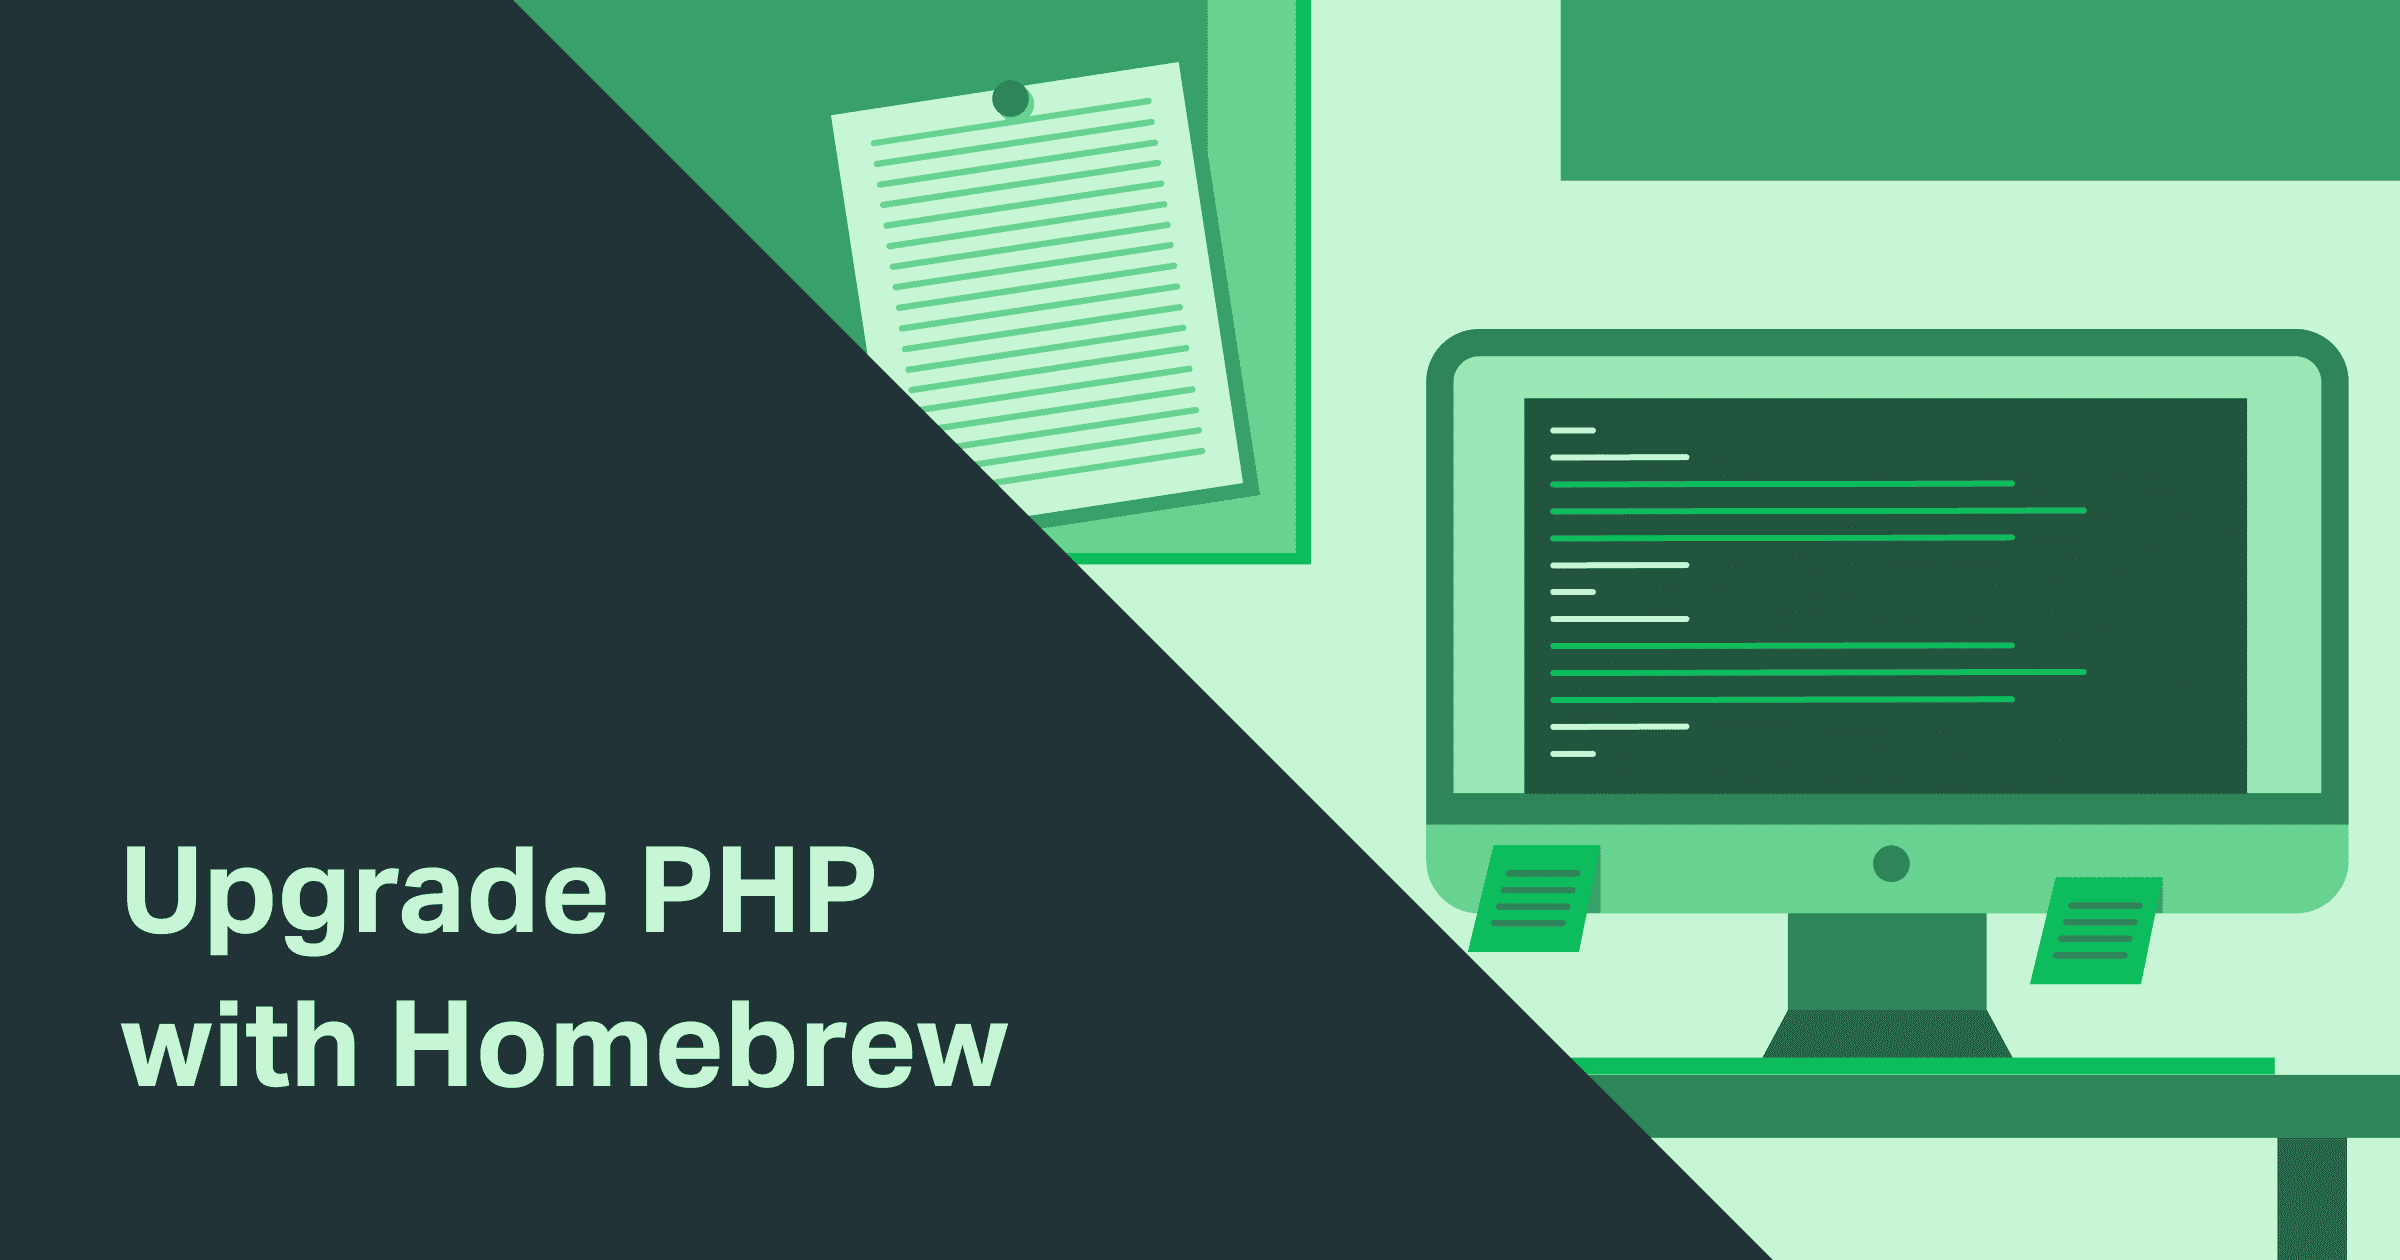 Upgrade PHP with Homebrew